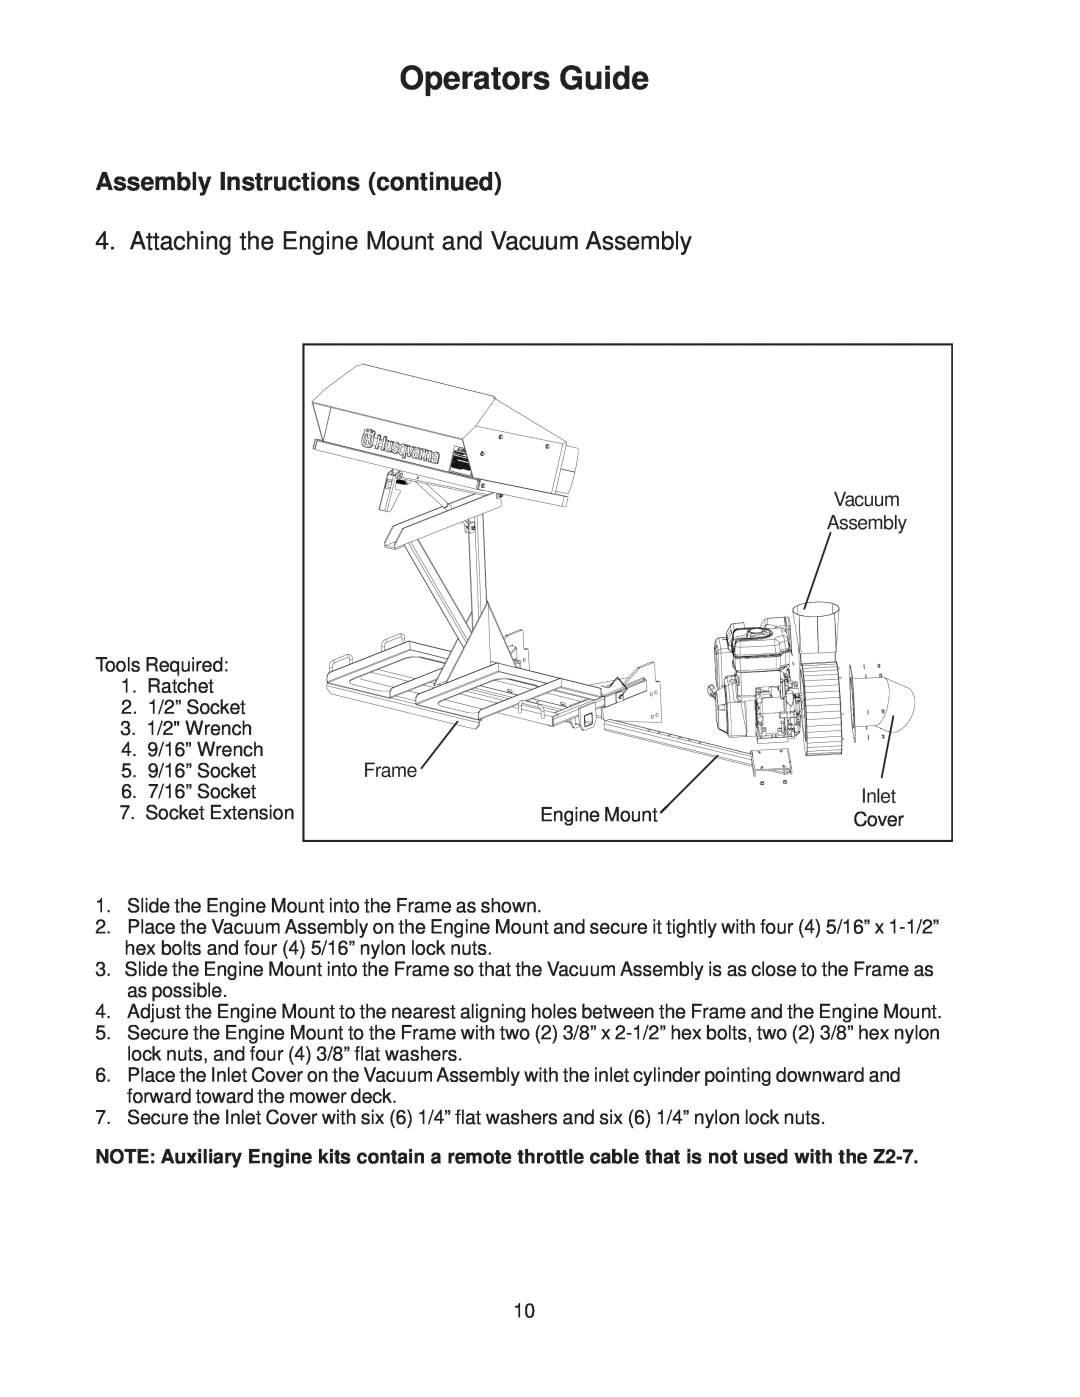 Husqvarna 540200800 Attaching the Engine Mount and Vacuum Assembly, Operators Guide, Assembly Instructions continued 